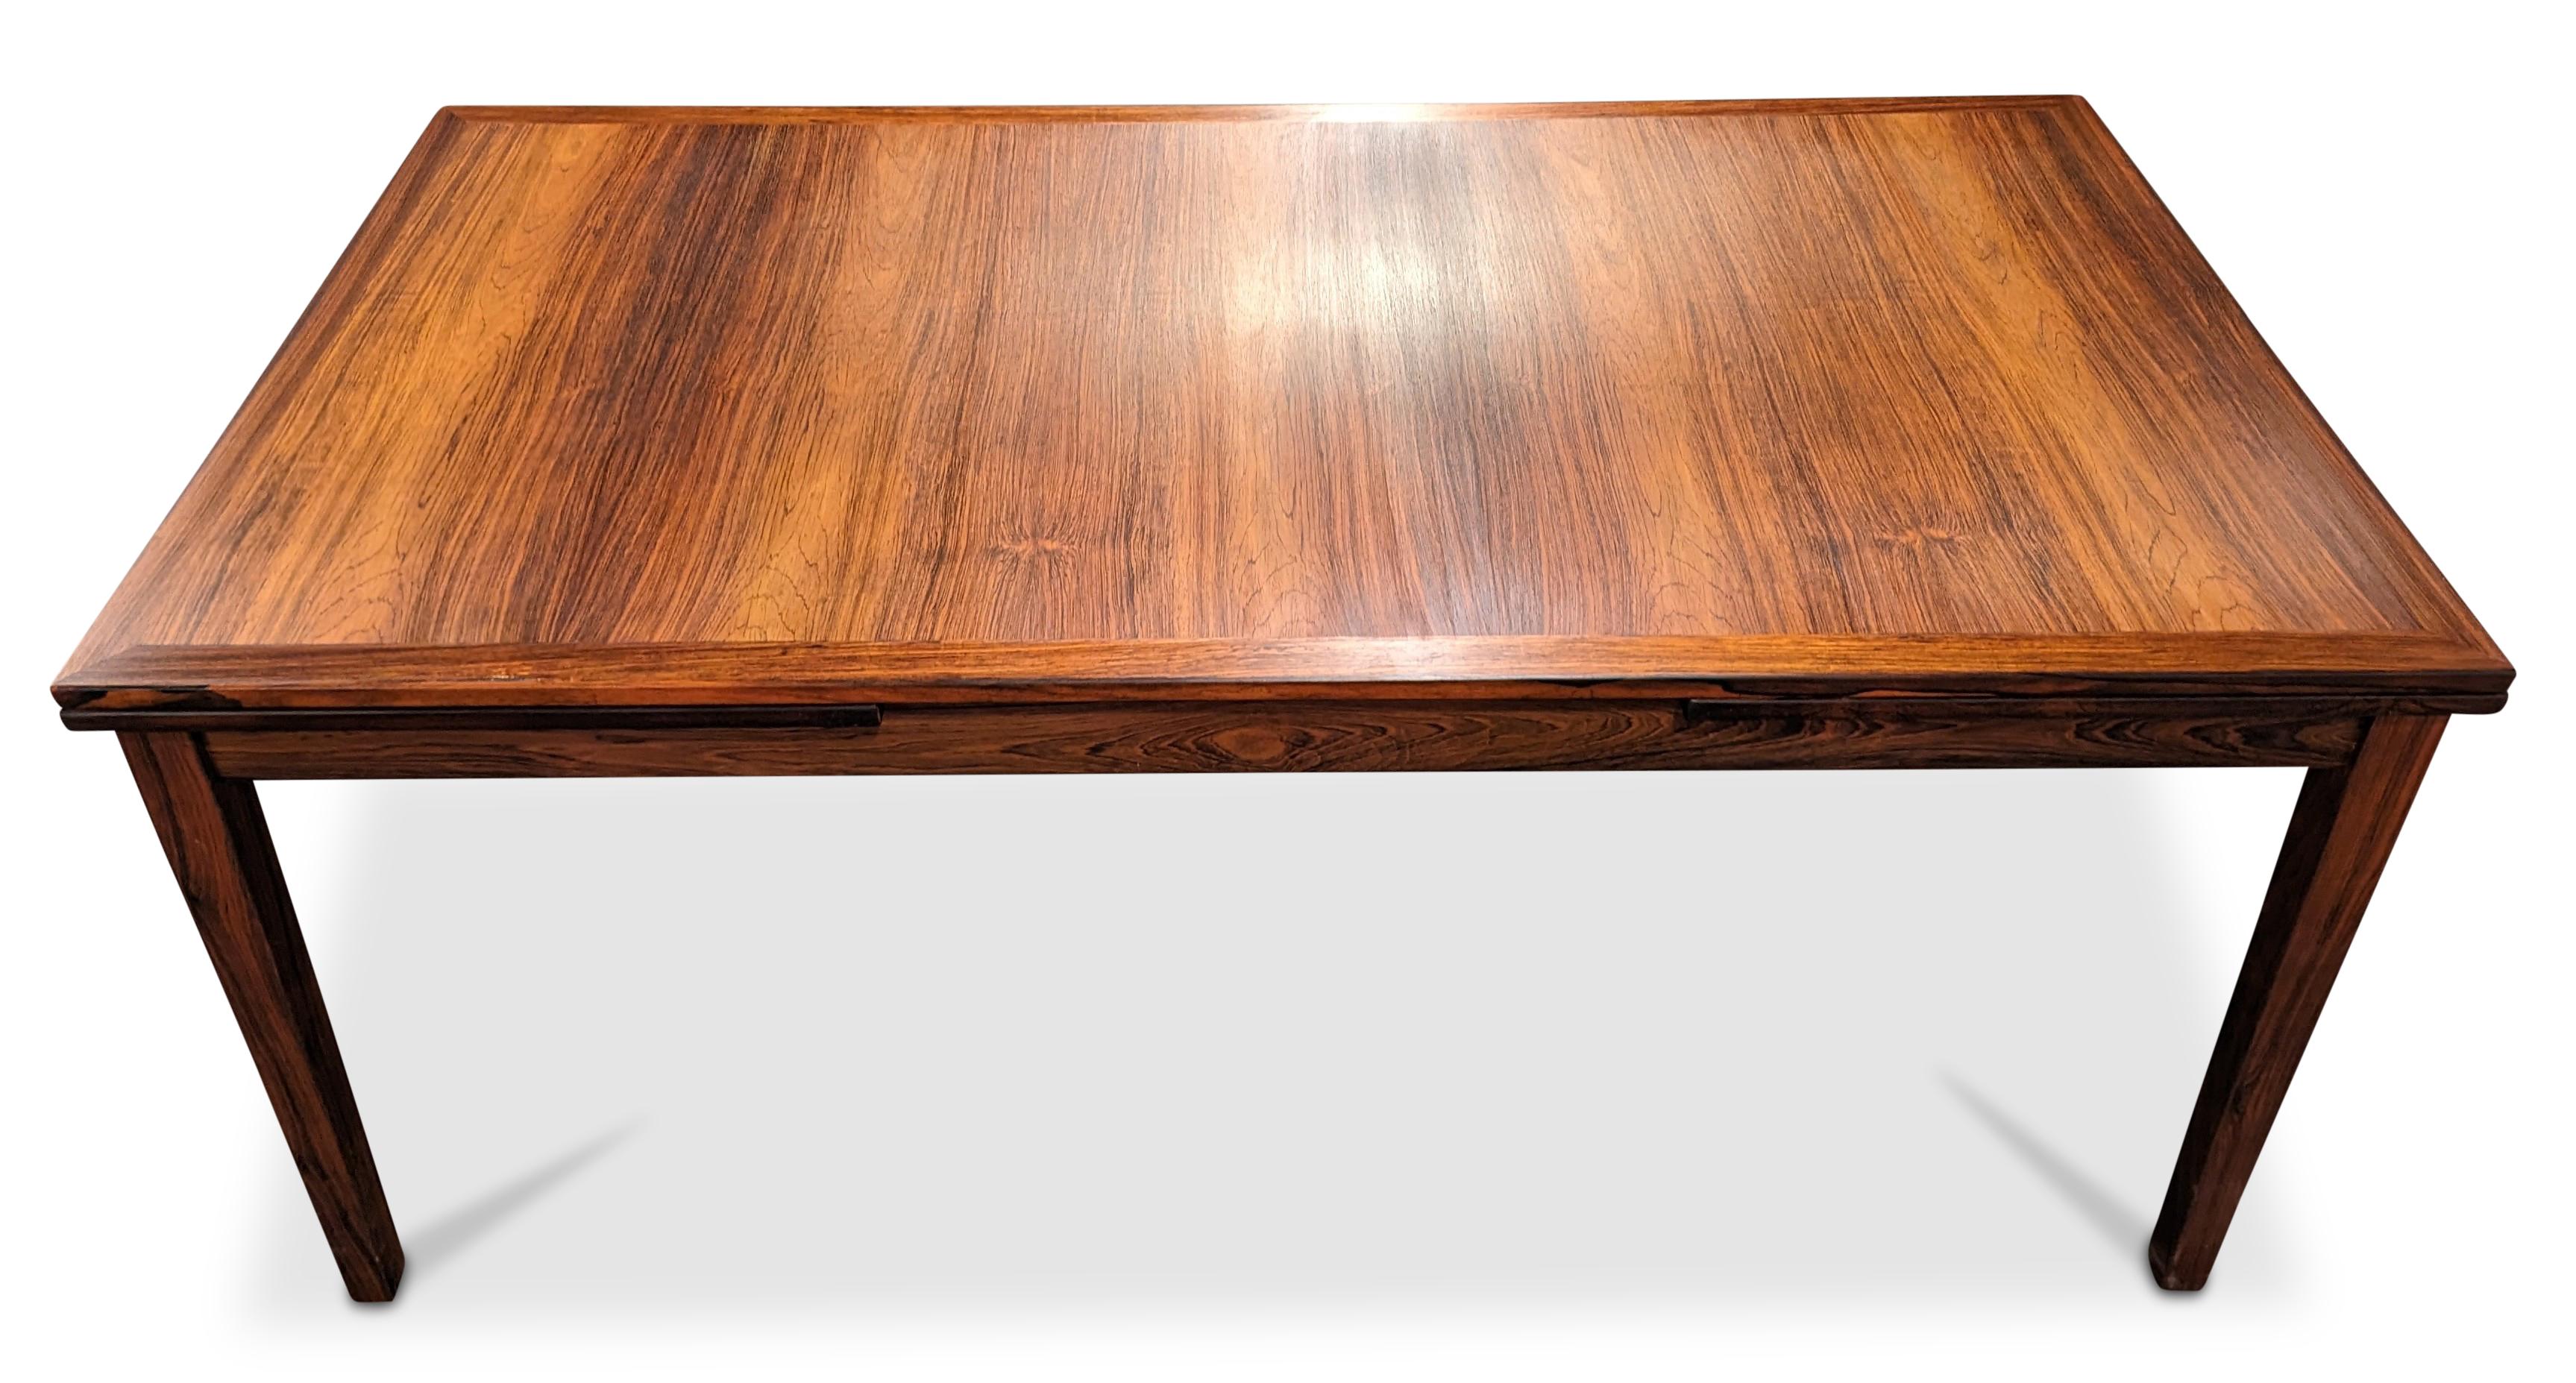 Kai Winding Rosewood Dining Table w Two Hidden Leaves, Vintage Danish 122299 4